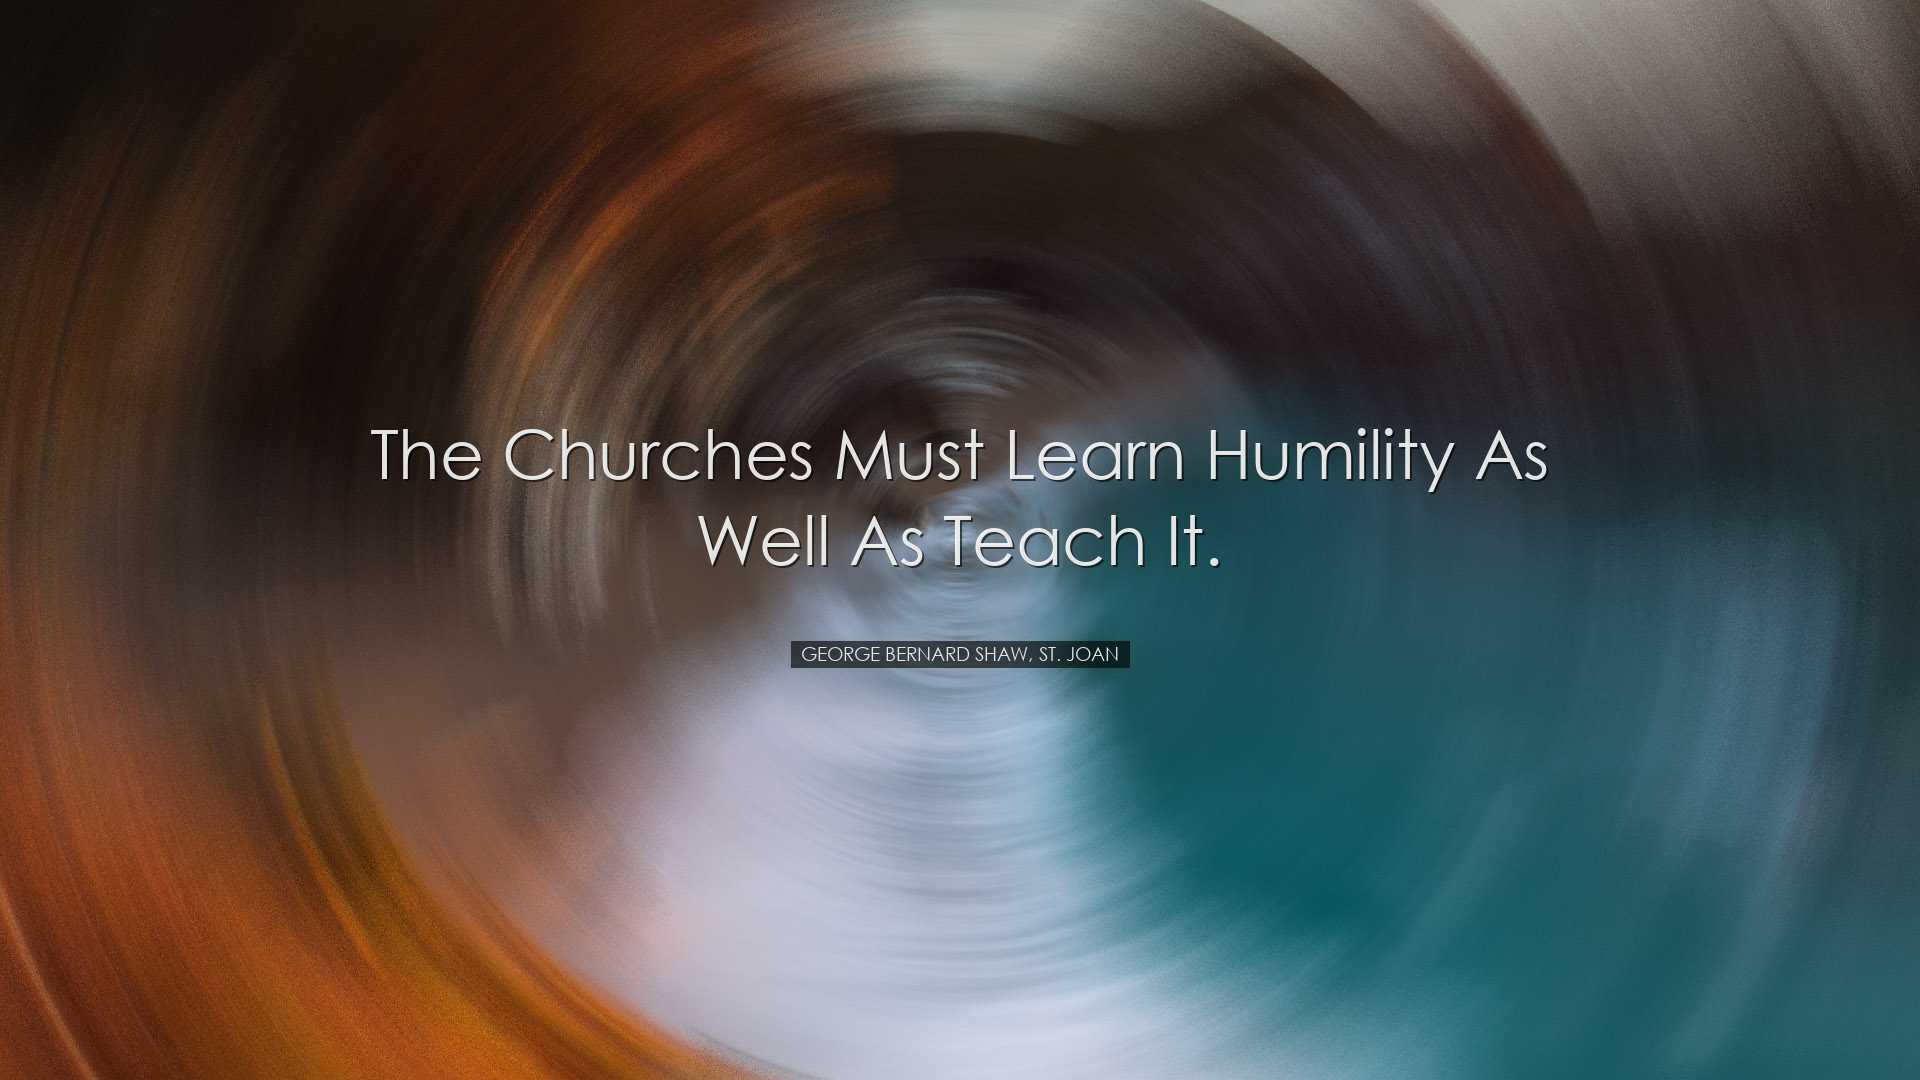 The churches must learn humility as well as teach it. - George Ber